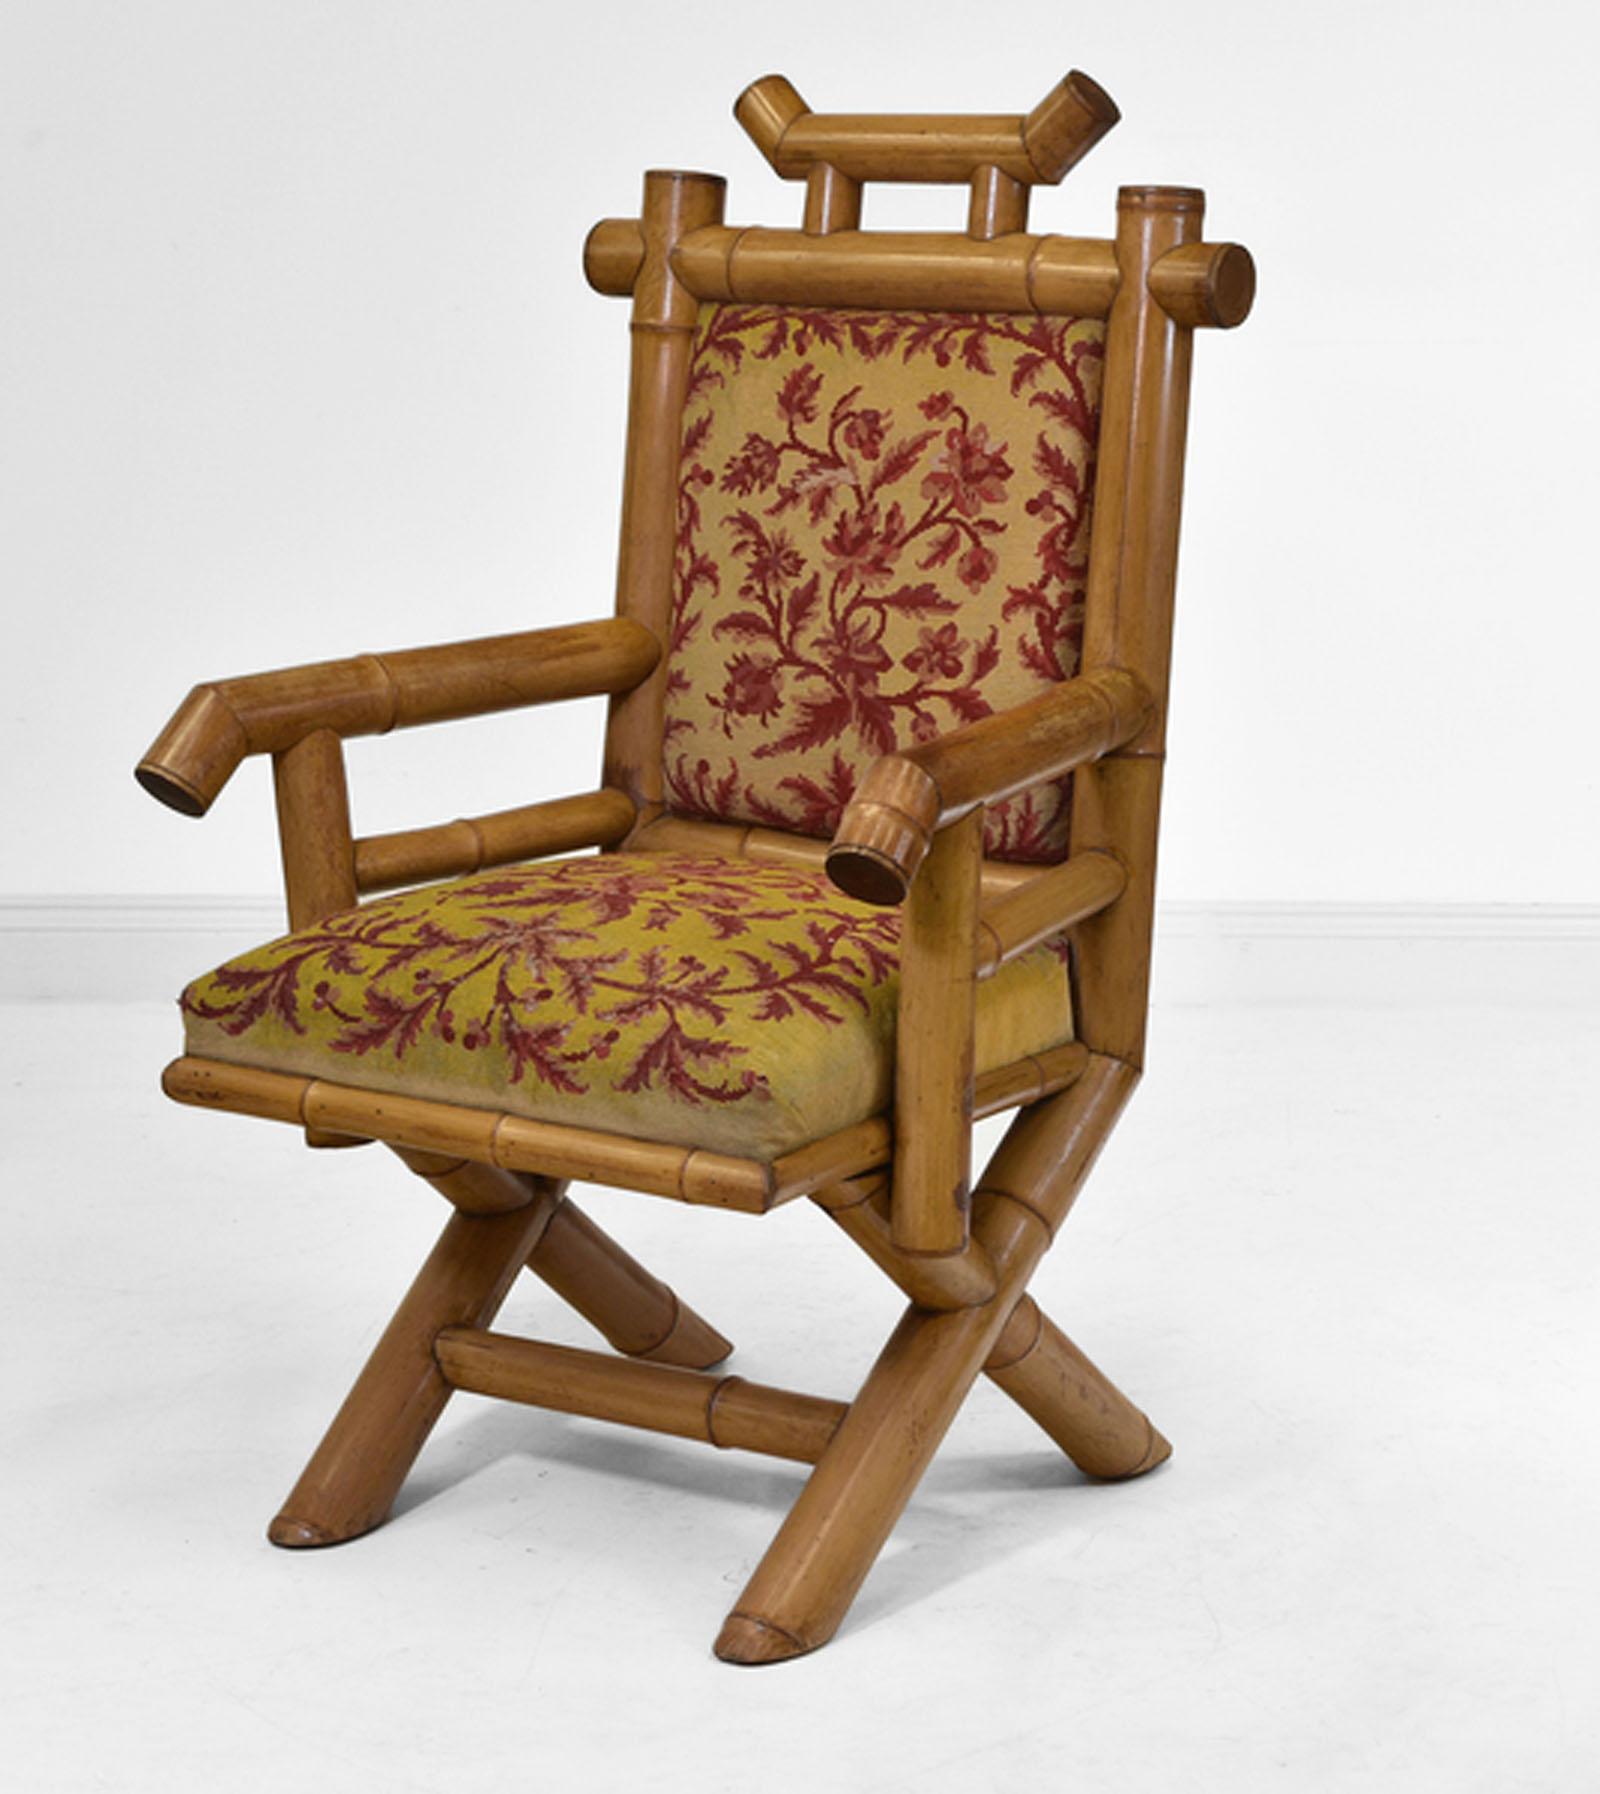 Antique French bamboo armchair in the manner of Perret, fils and vibert Paris. Circa 1890.

This interesting armchair is made from large pieces of bamboo, and has the original upholstered fabric to the front. The seating is still very usable,